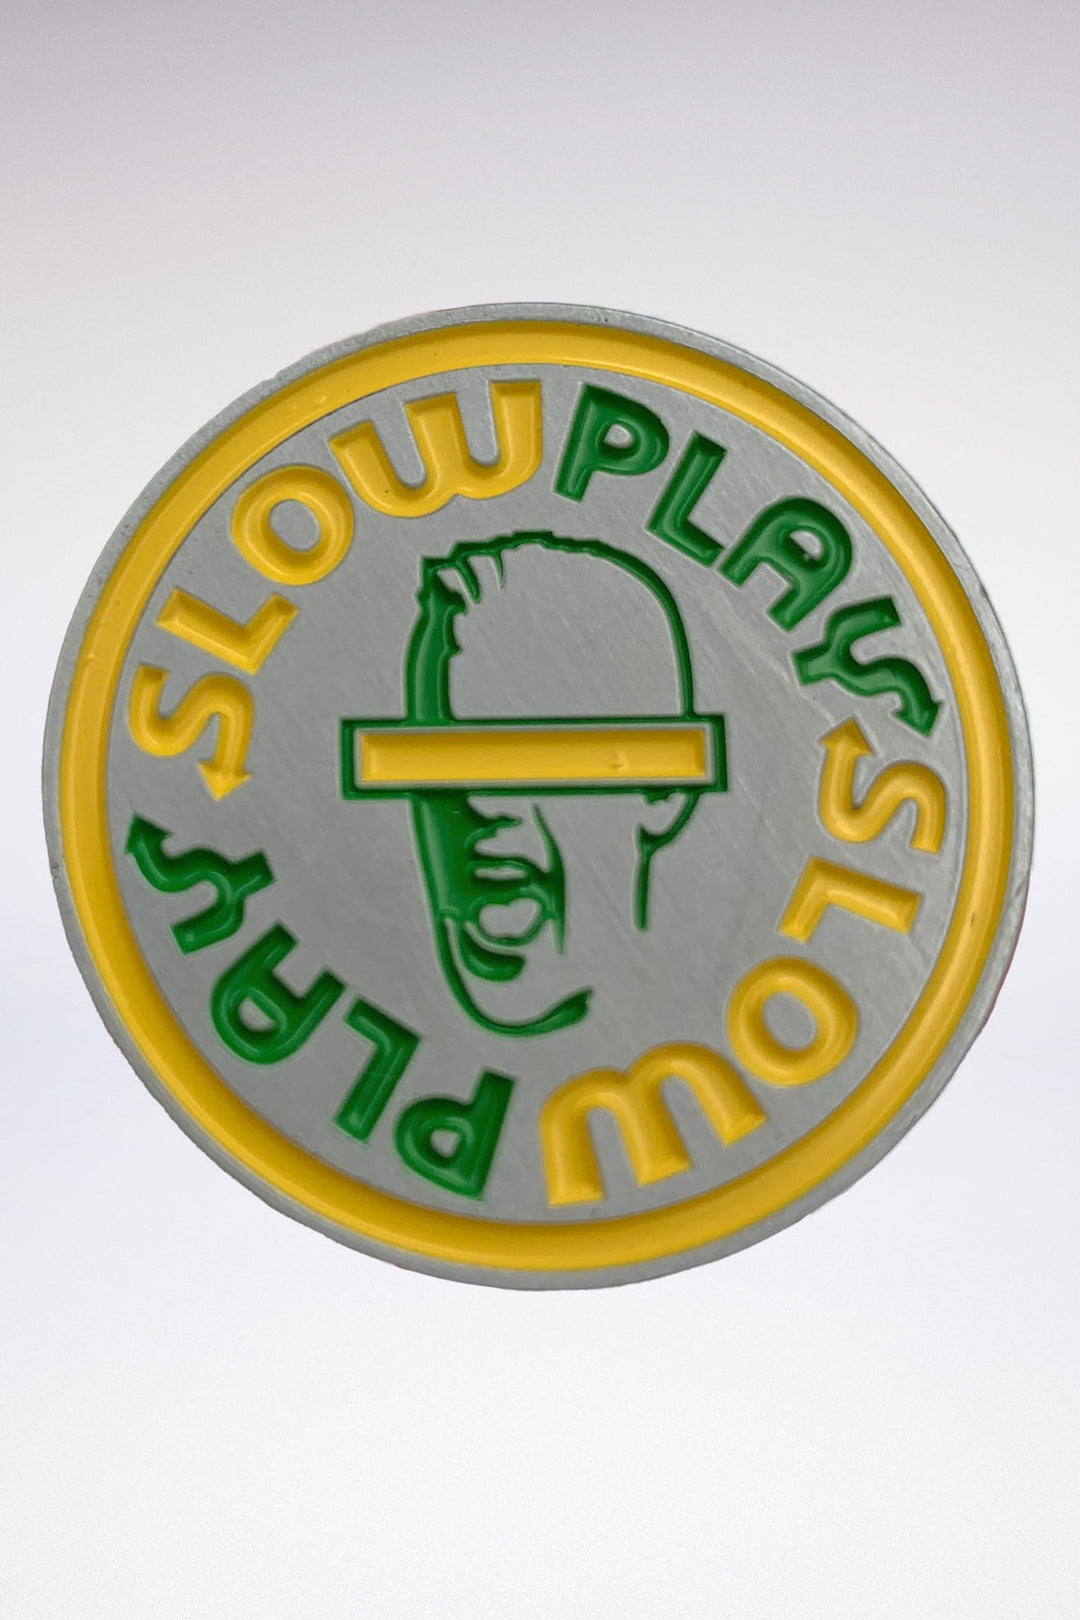 Slow Play Limited Coin